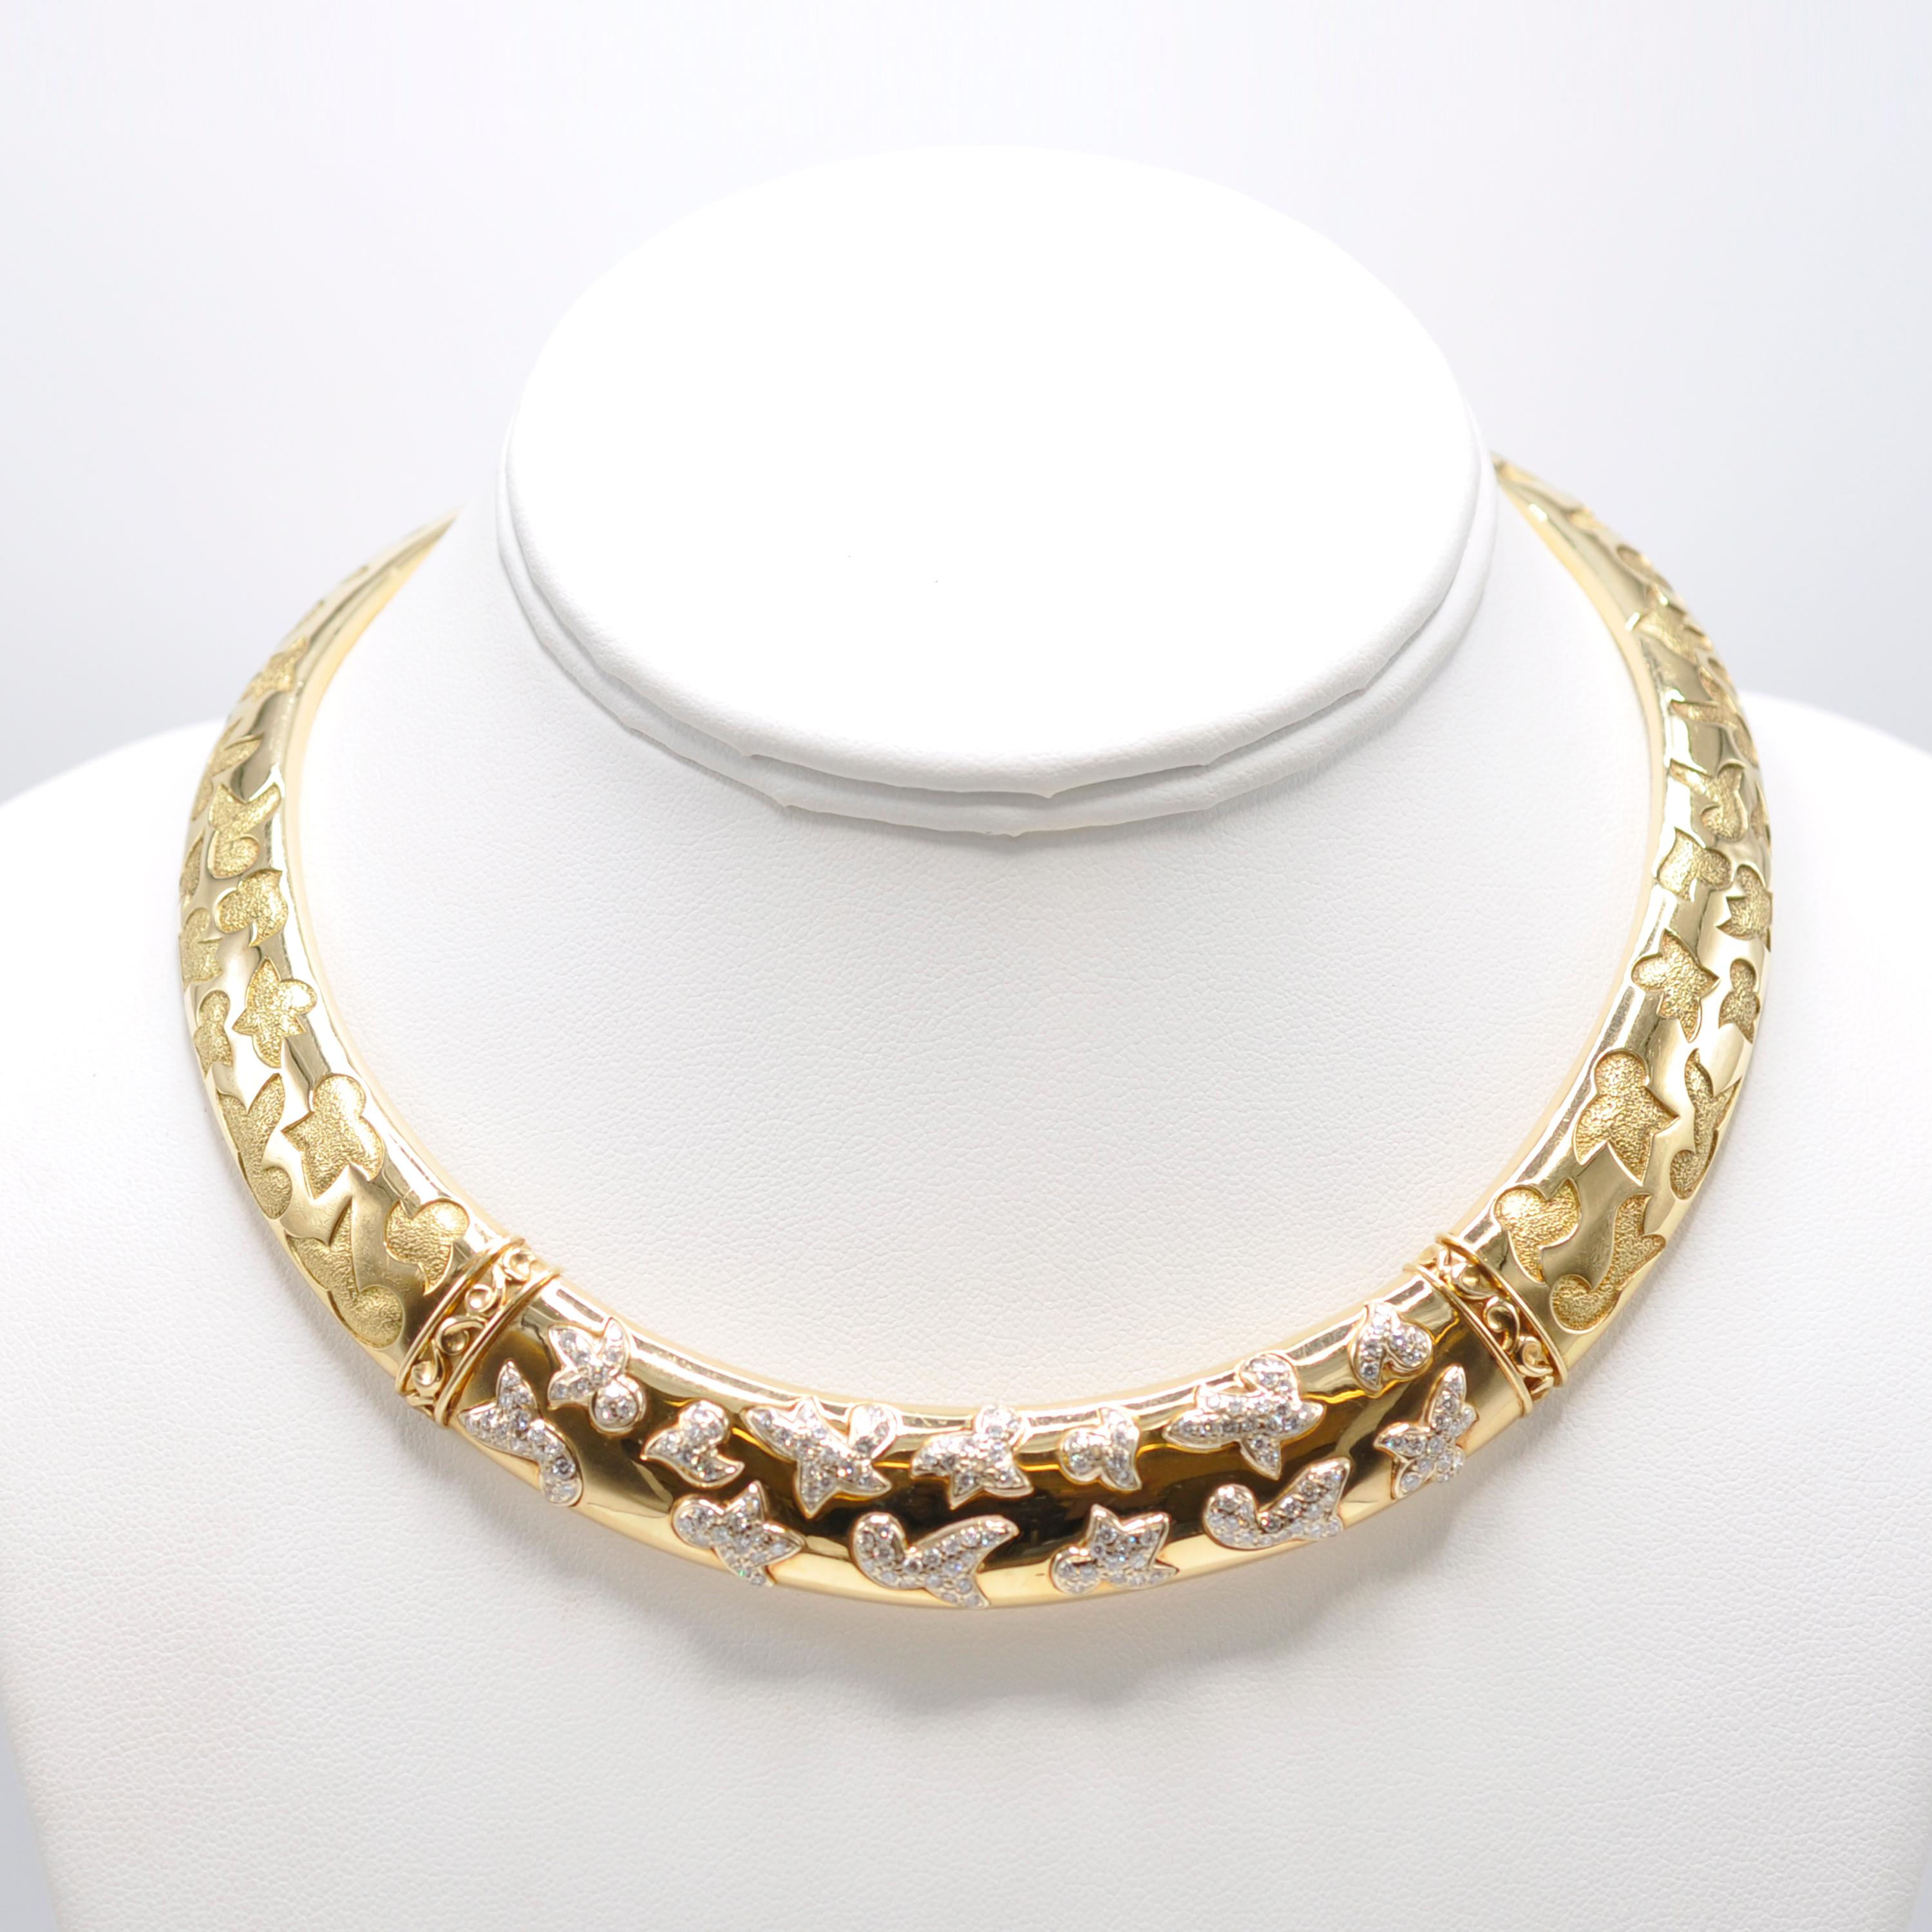 Bold and Beautiful our Van Cleef & Arpels 18 Karat yellow gold and 3.2 cts. diamond dove motif collar necklace is a dream for any woman to wear. The necklace lays effortlessly on your collar creating an inspiring centerpiece for a simple but elegant